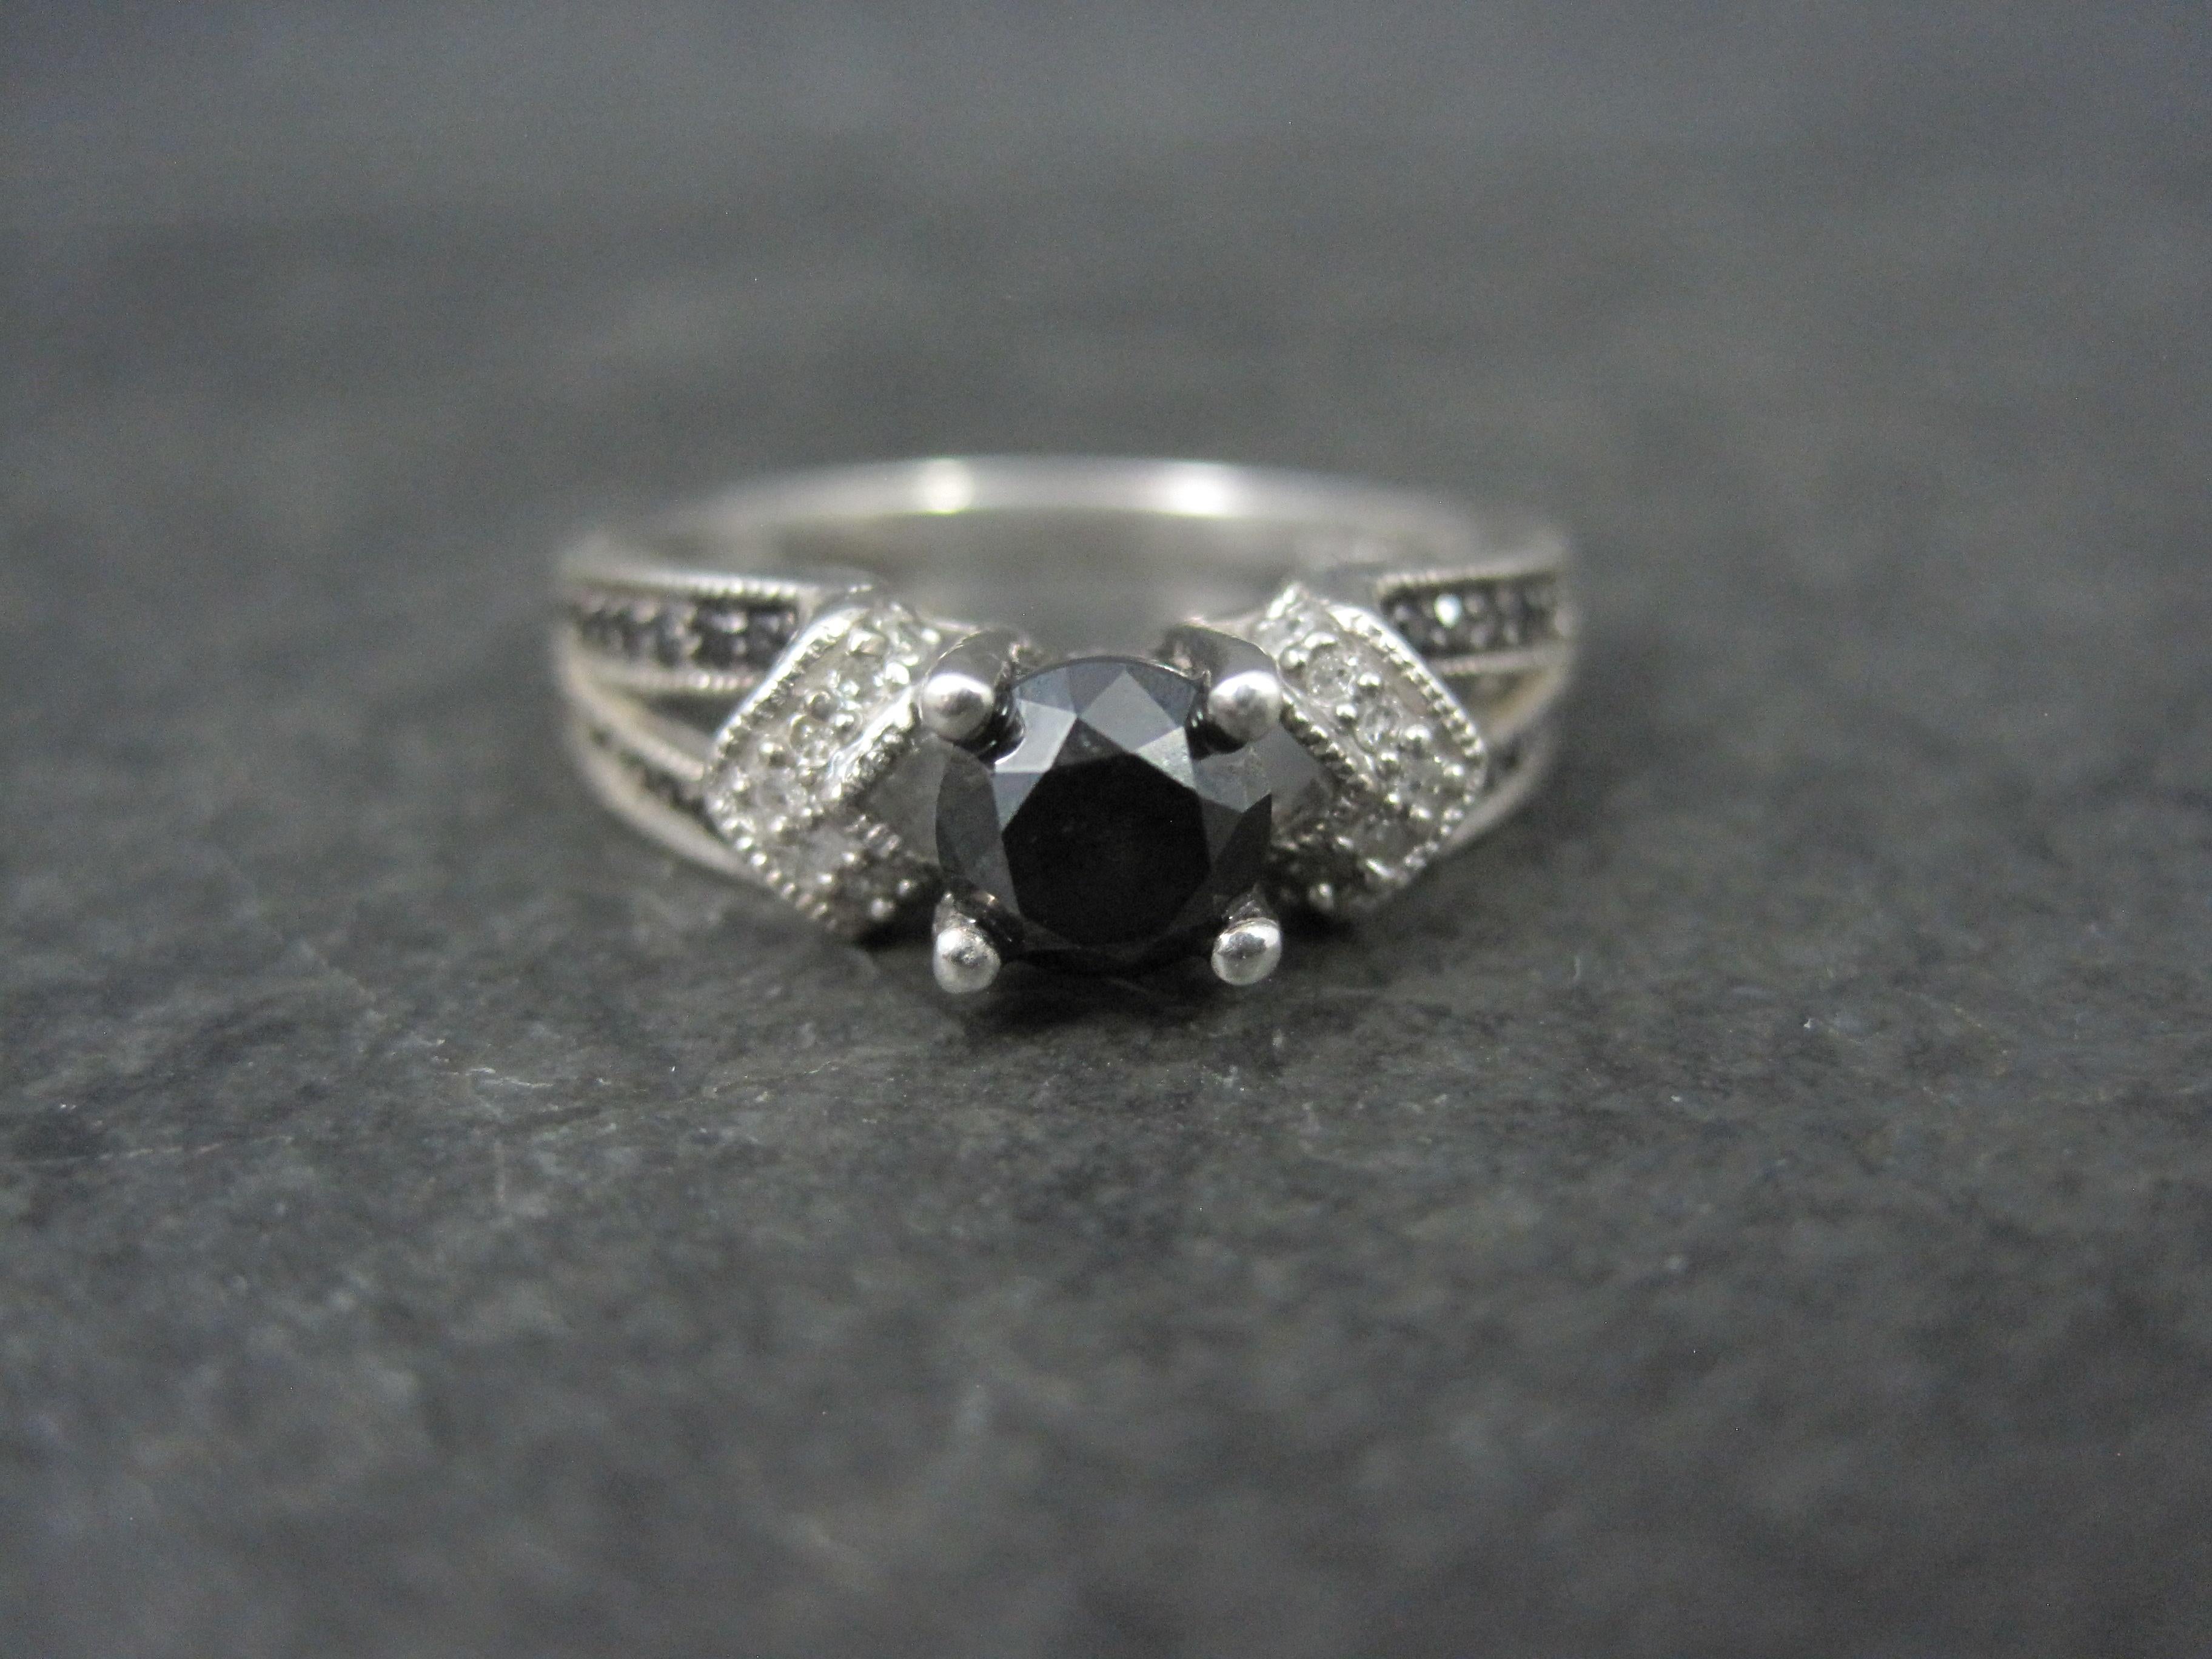 This beautiful engagement ring is sterling silver.
It features a .50 carat, round cut black diamond focal and an estimated .30 carats in black and white diamond accents.

The face of this ring measures 1/4 of an inch north to south with a rise of